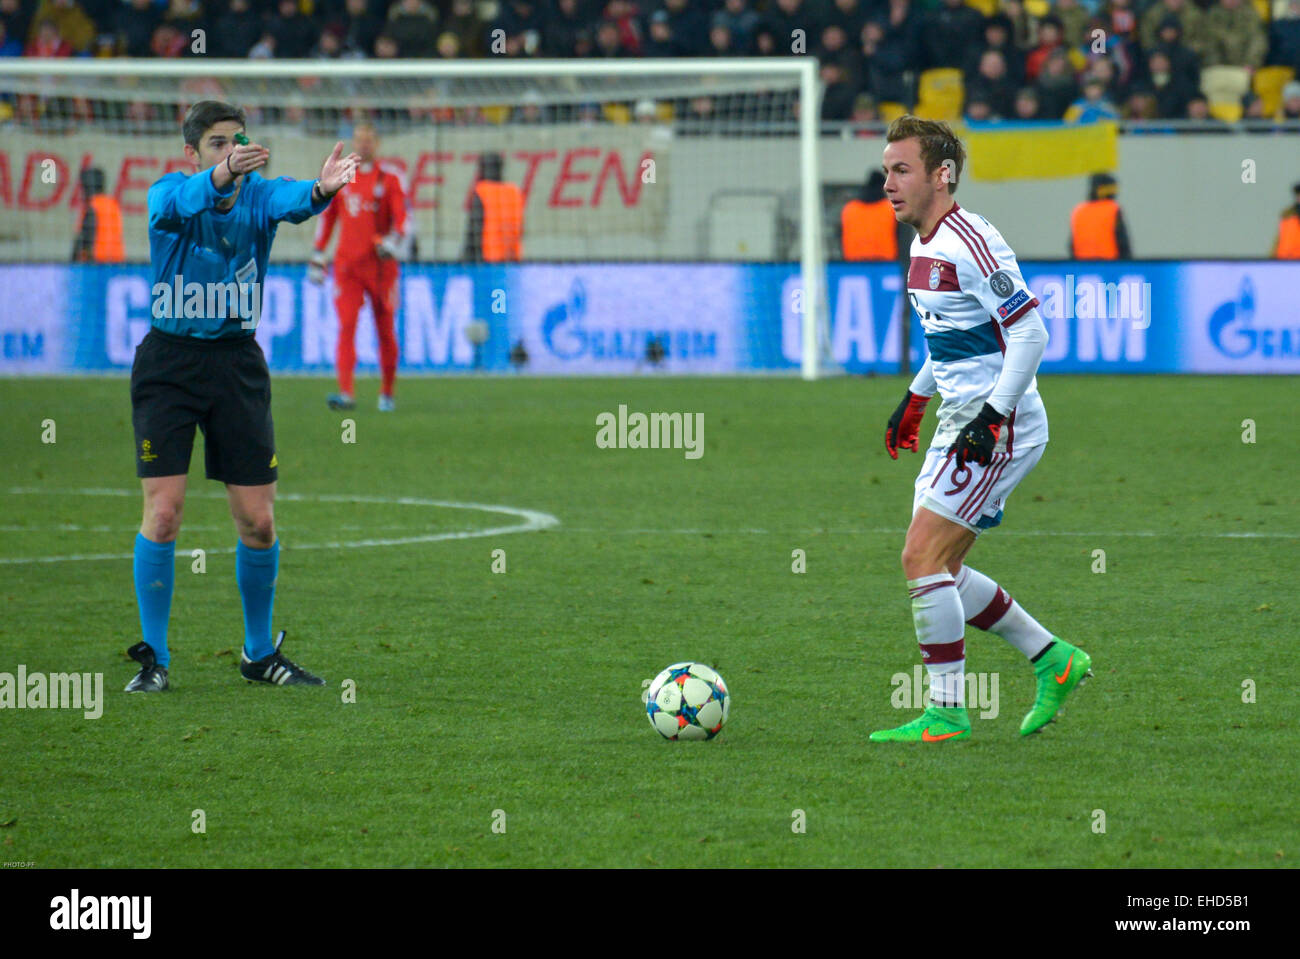 Mario Götze with ball during the match between FC Shakhtar Donetsk vs FC Bayern München. UEFA Champions League. Stock Photo